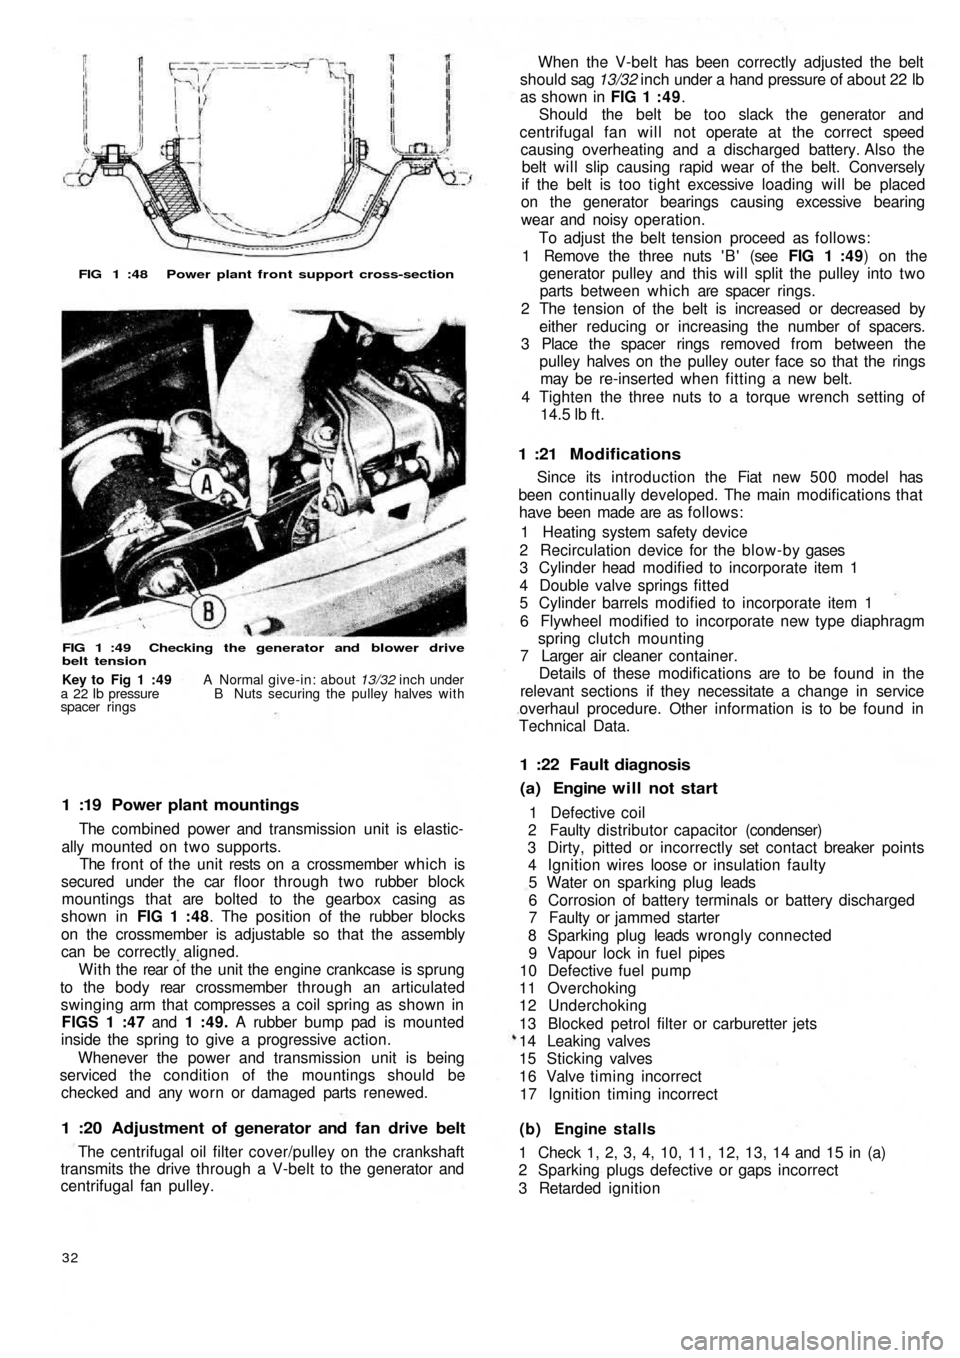 FIAT 500 1971 1.G Workshop Manual FIG 1 :48  Power plant front support cross-section
FIG 1 :49  Checking  the generator and  blower drive
belt tension
1 :19  Power plant mountings
The combined power and transmission unit is elastic-
a